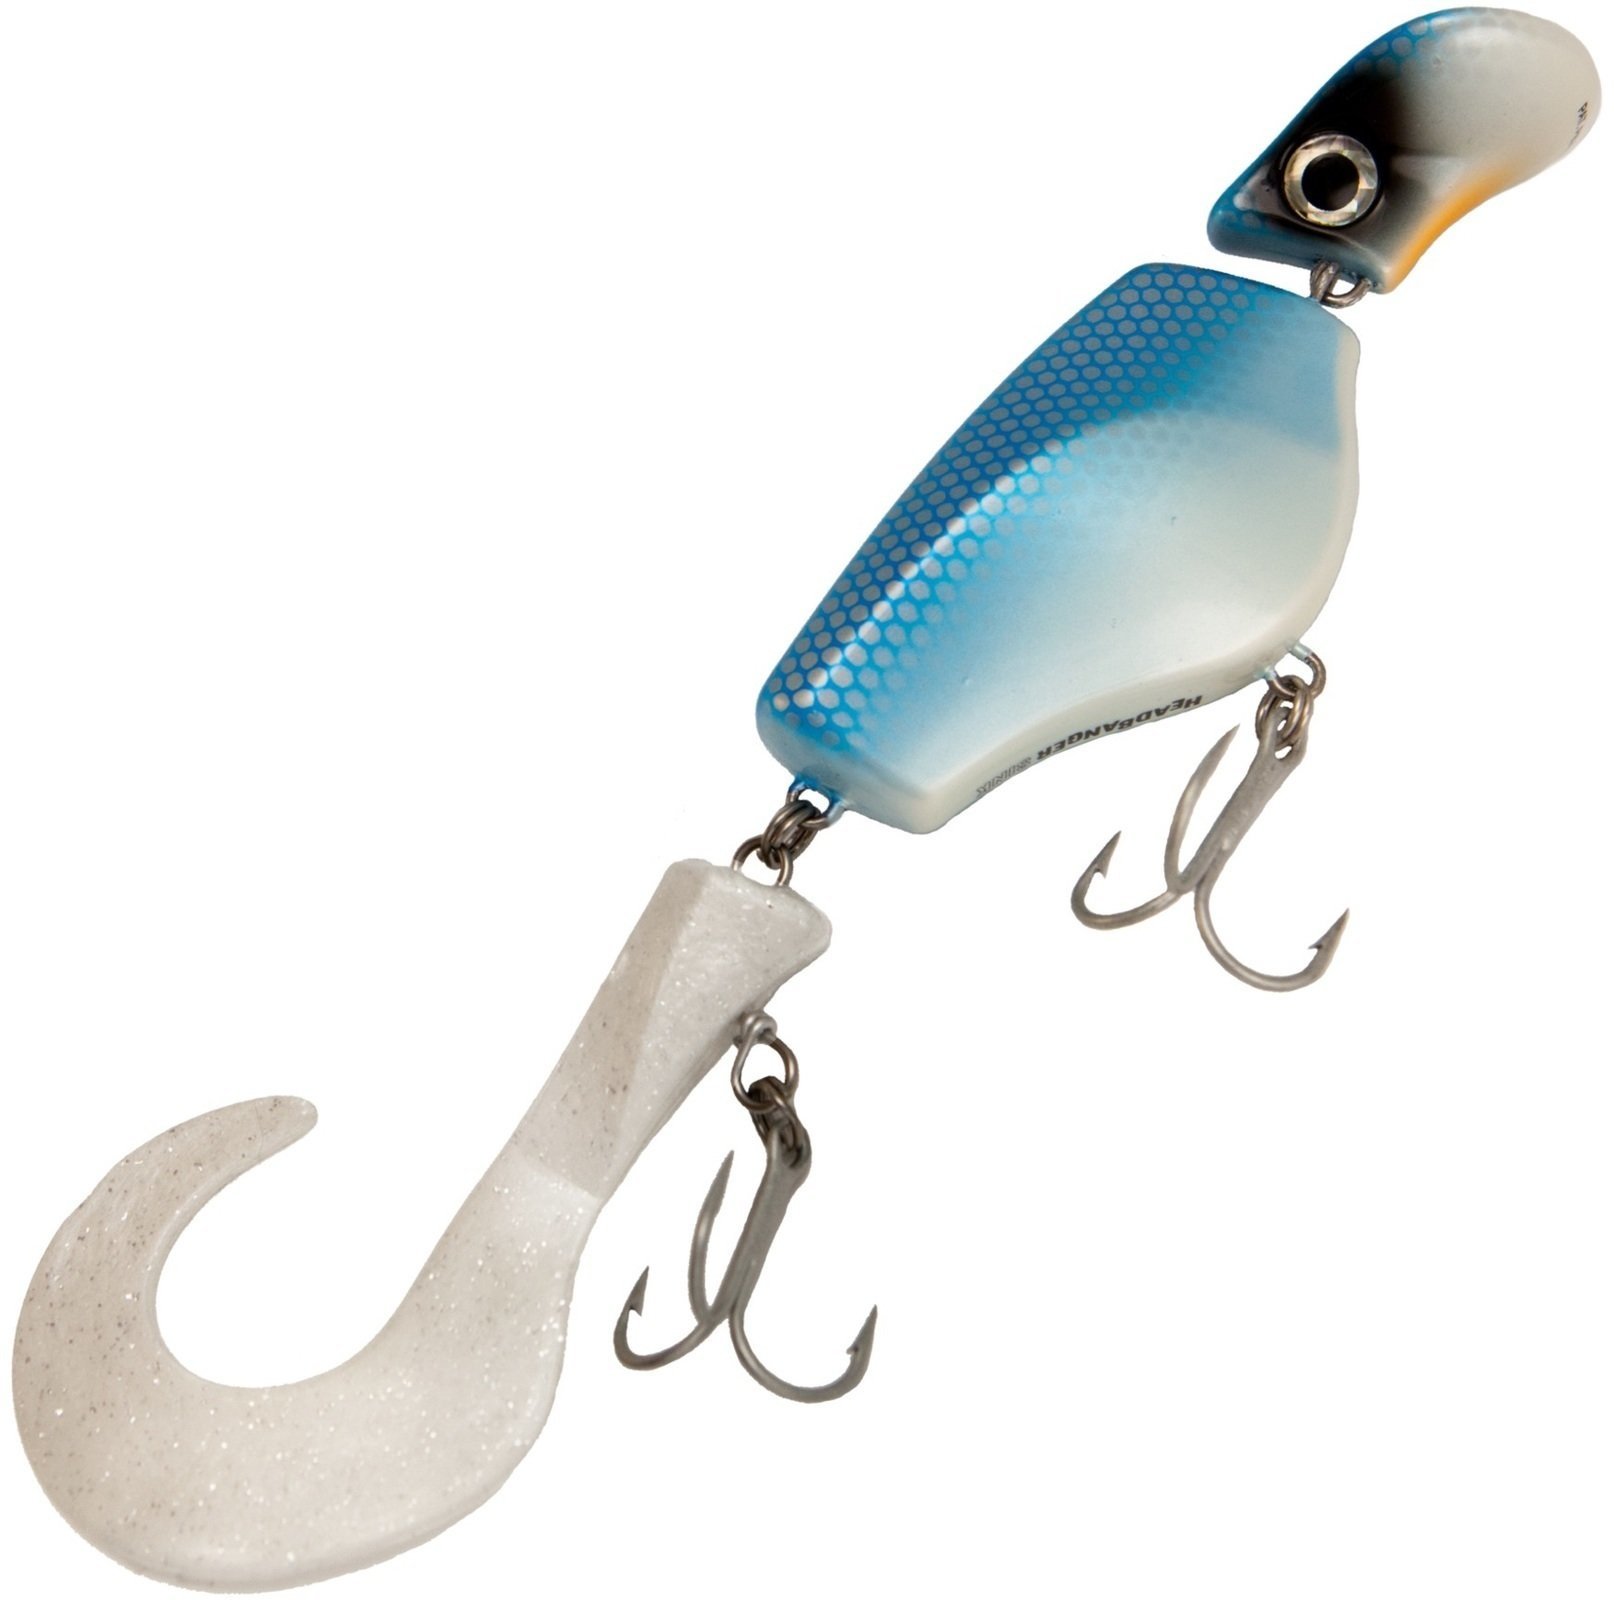 Esca artificiale Headbanger Lures Tail Floating Blue/Silver 23 cm 48 g